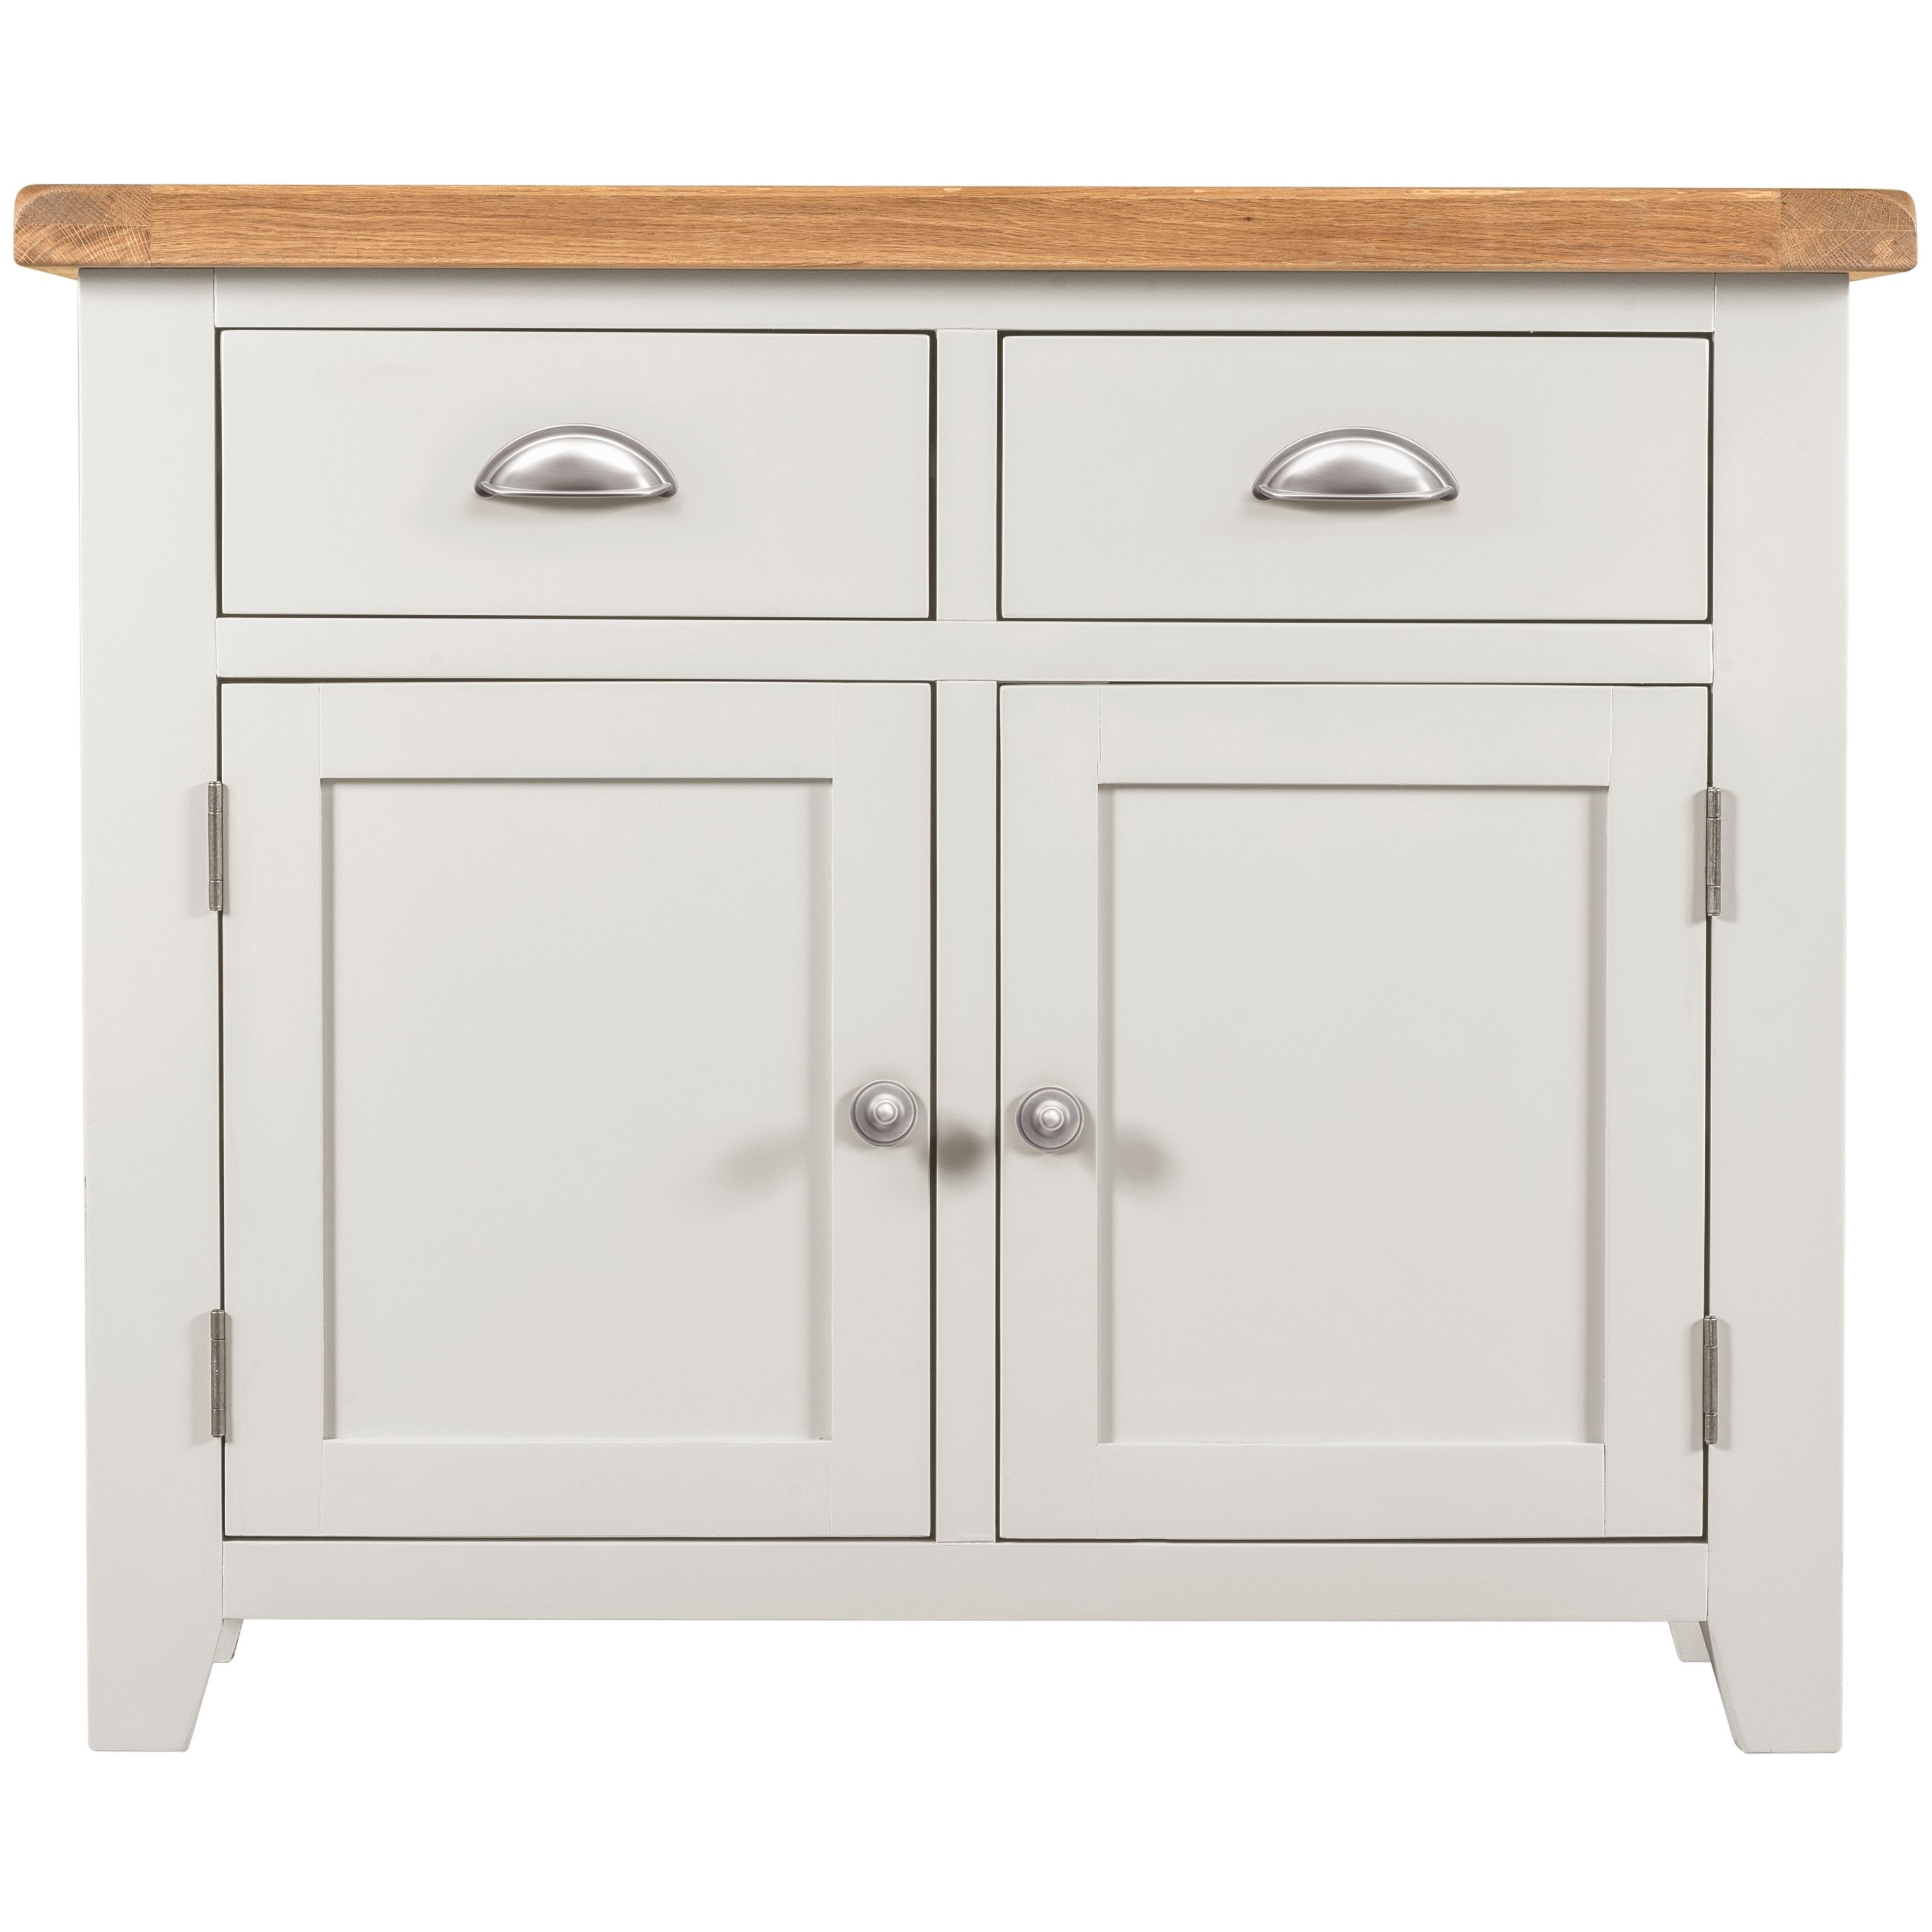 Willow White 2 Door 2 Drawer Sideboard | The Haven Home Interiors With Regard To Most Current 2 Drawer Sideboards (Photo 8 of 20)